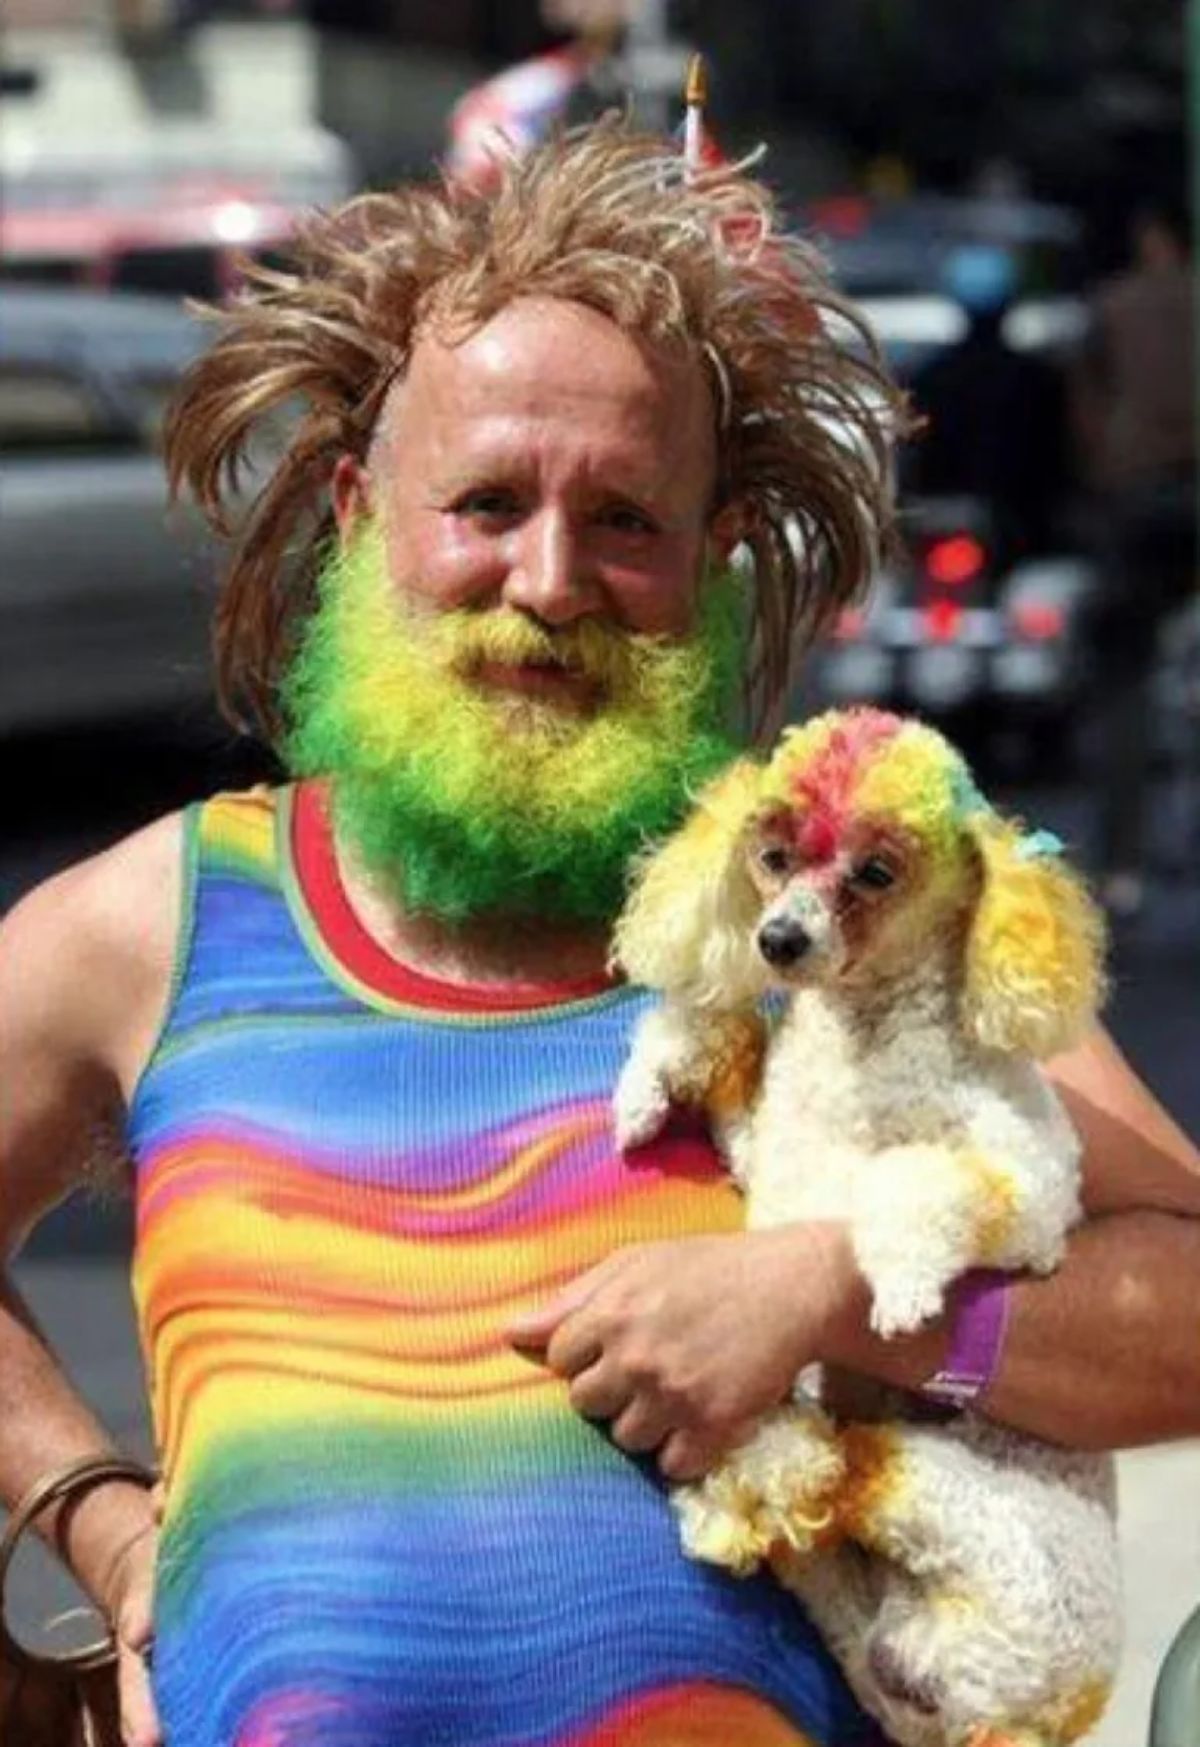 small white poodle coloured in rainbow colours held by a man with green and yellow beard and rainbow coloured shirt